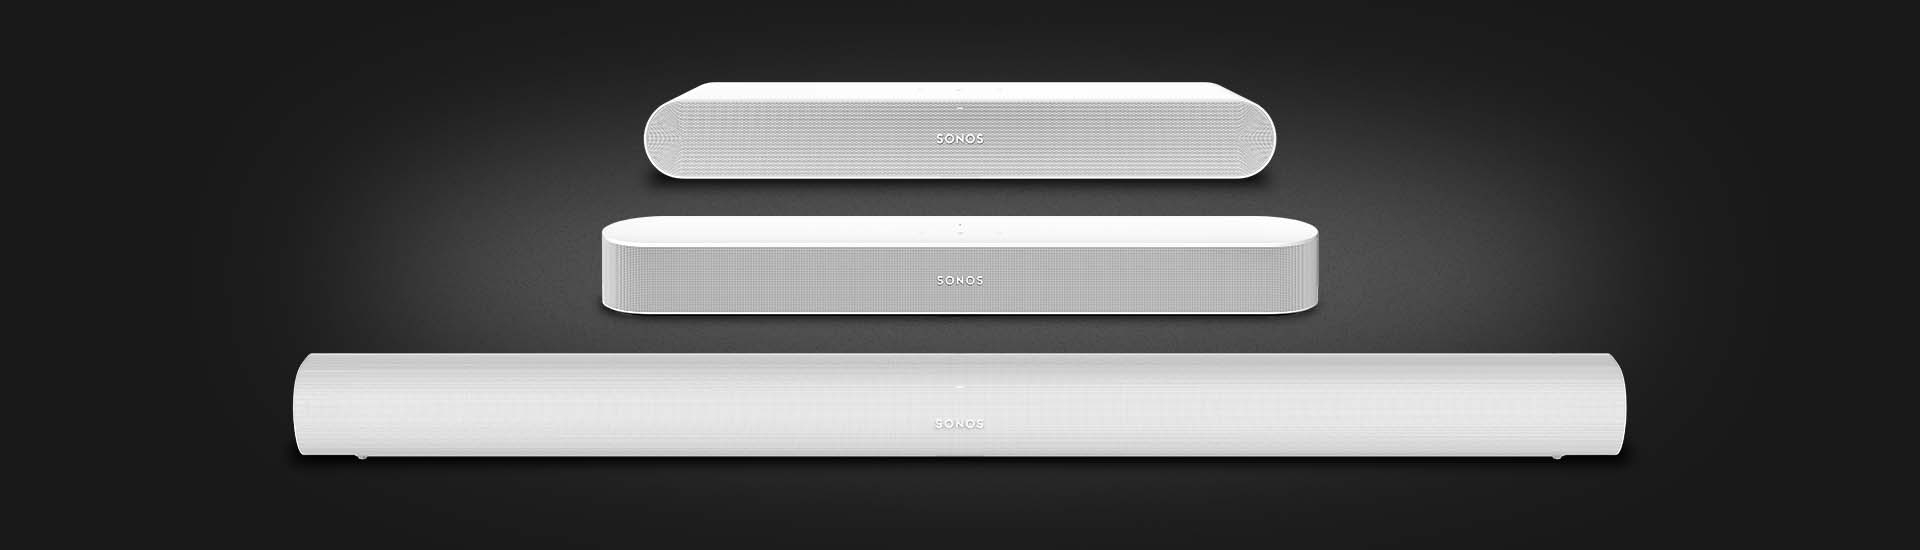 Review: Sonos Beam (Gen 2)  The Best Of The Small Bars